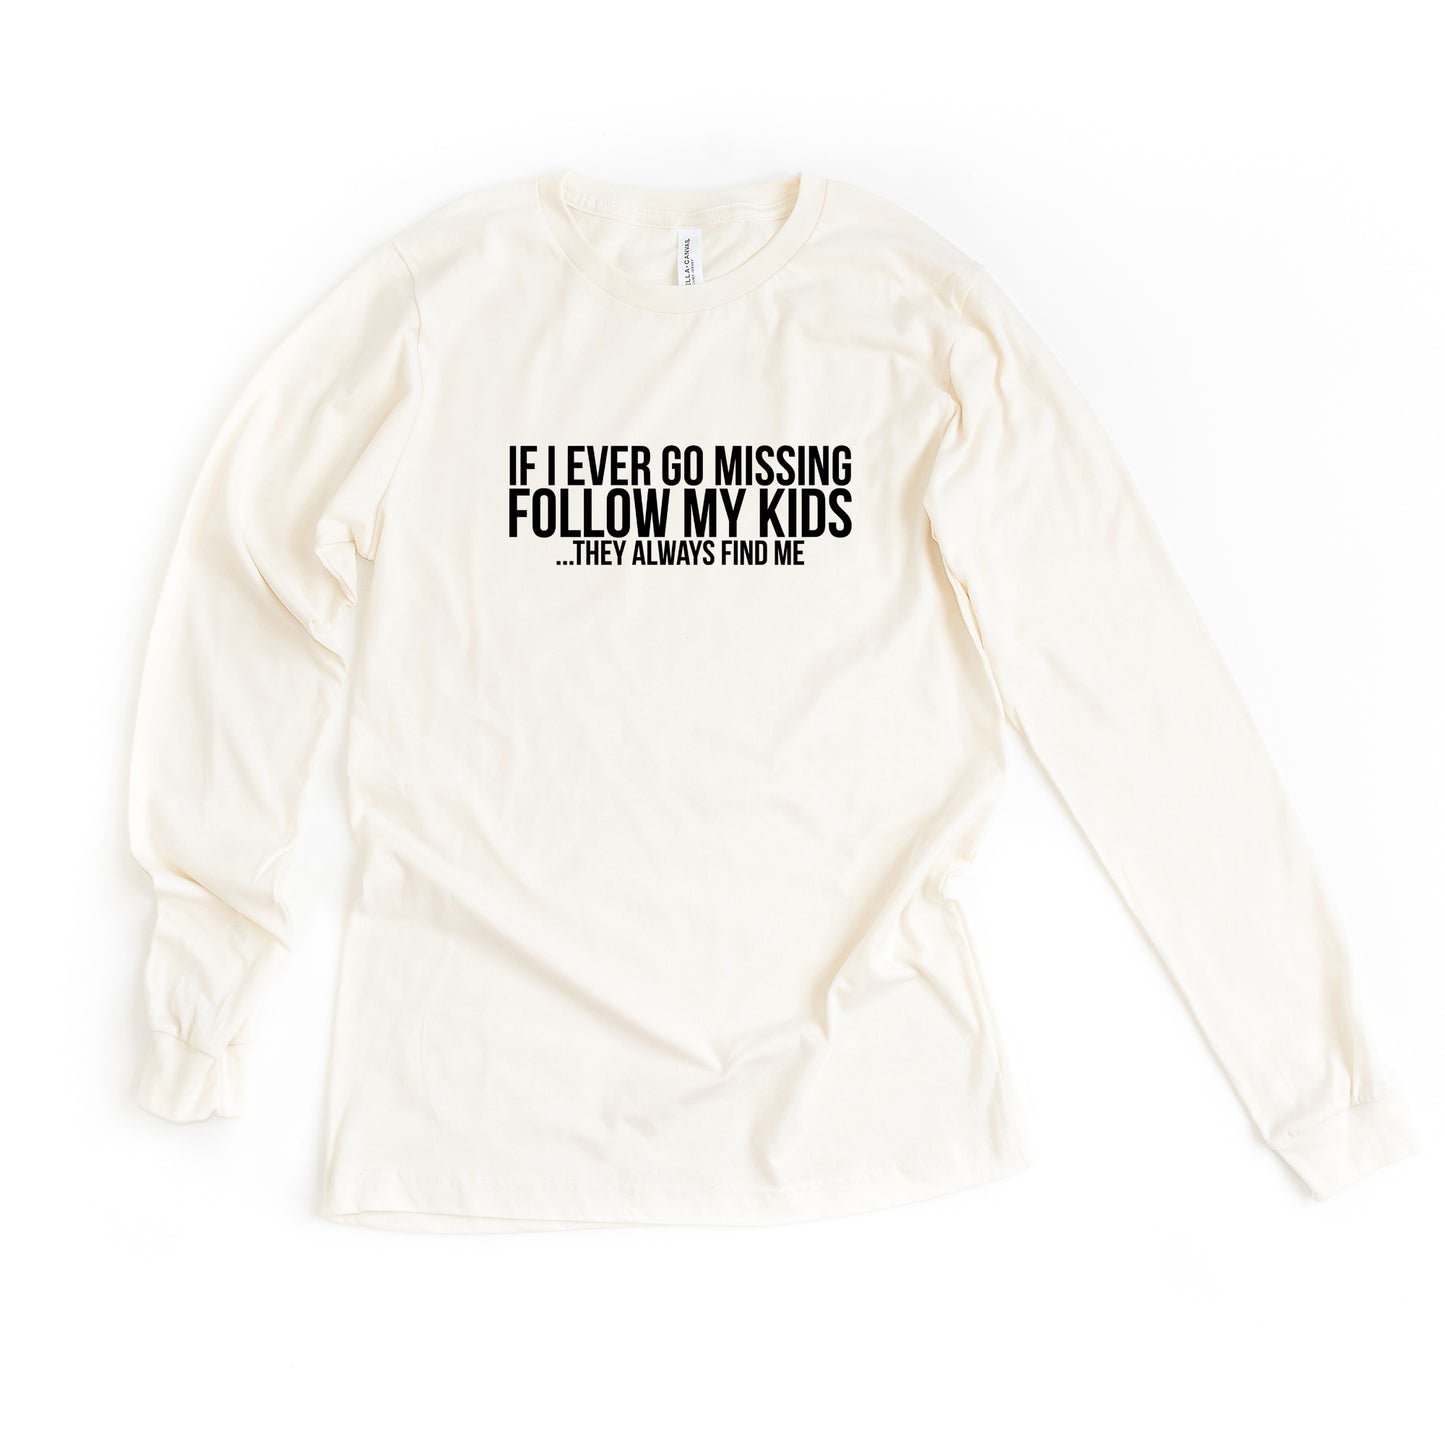 If Missing Follow My Kids | Long Sleeve Graphic Tee